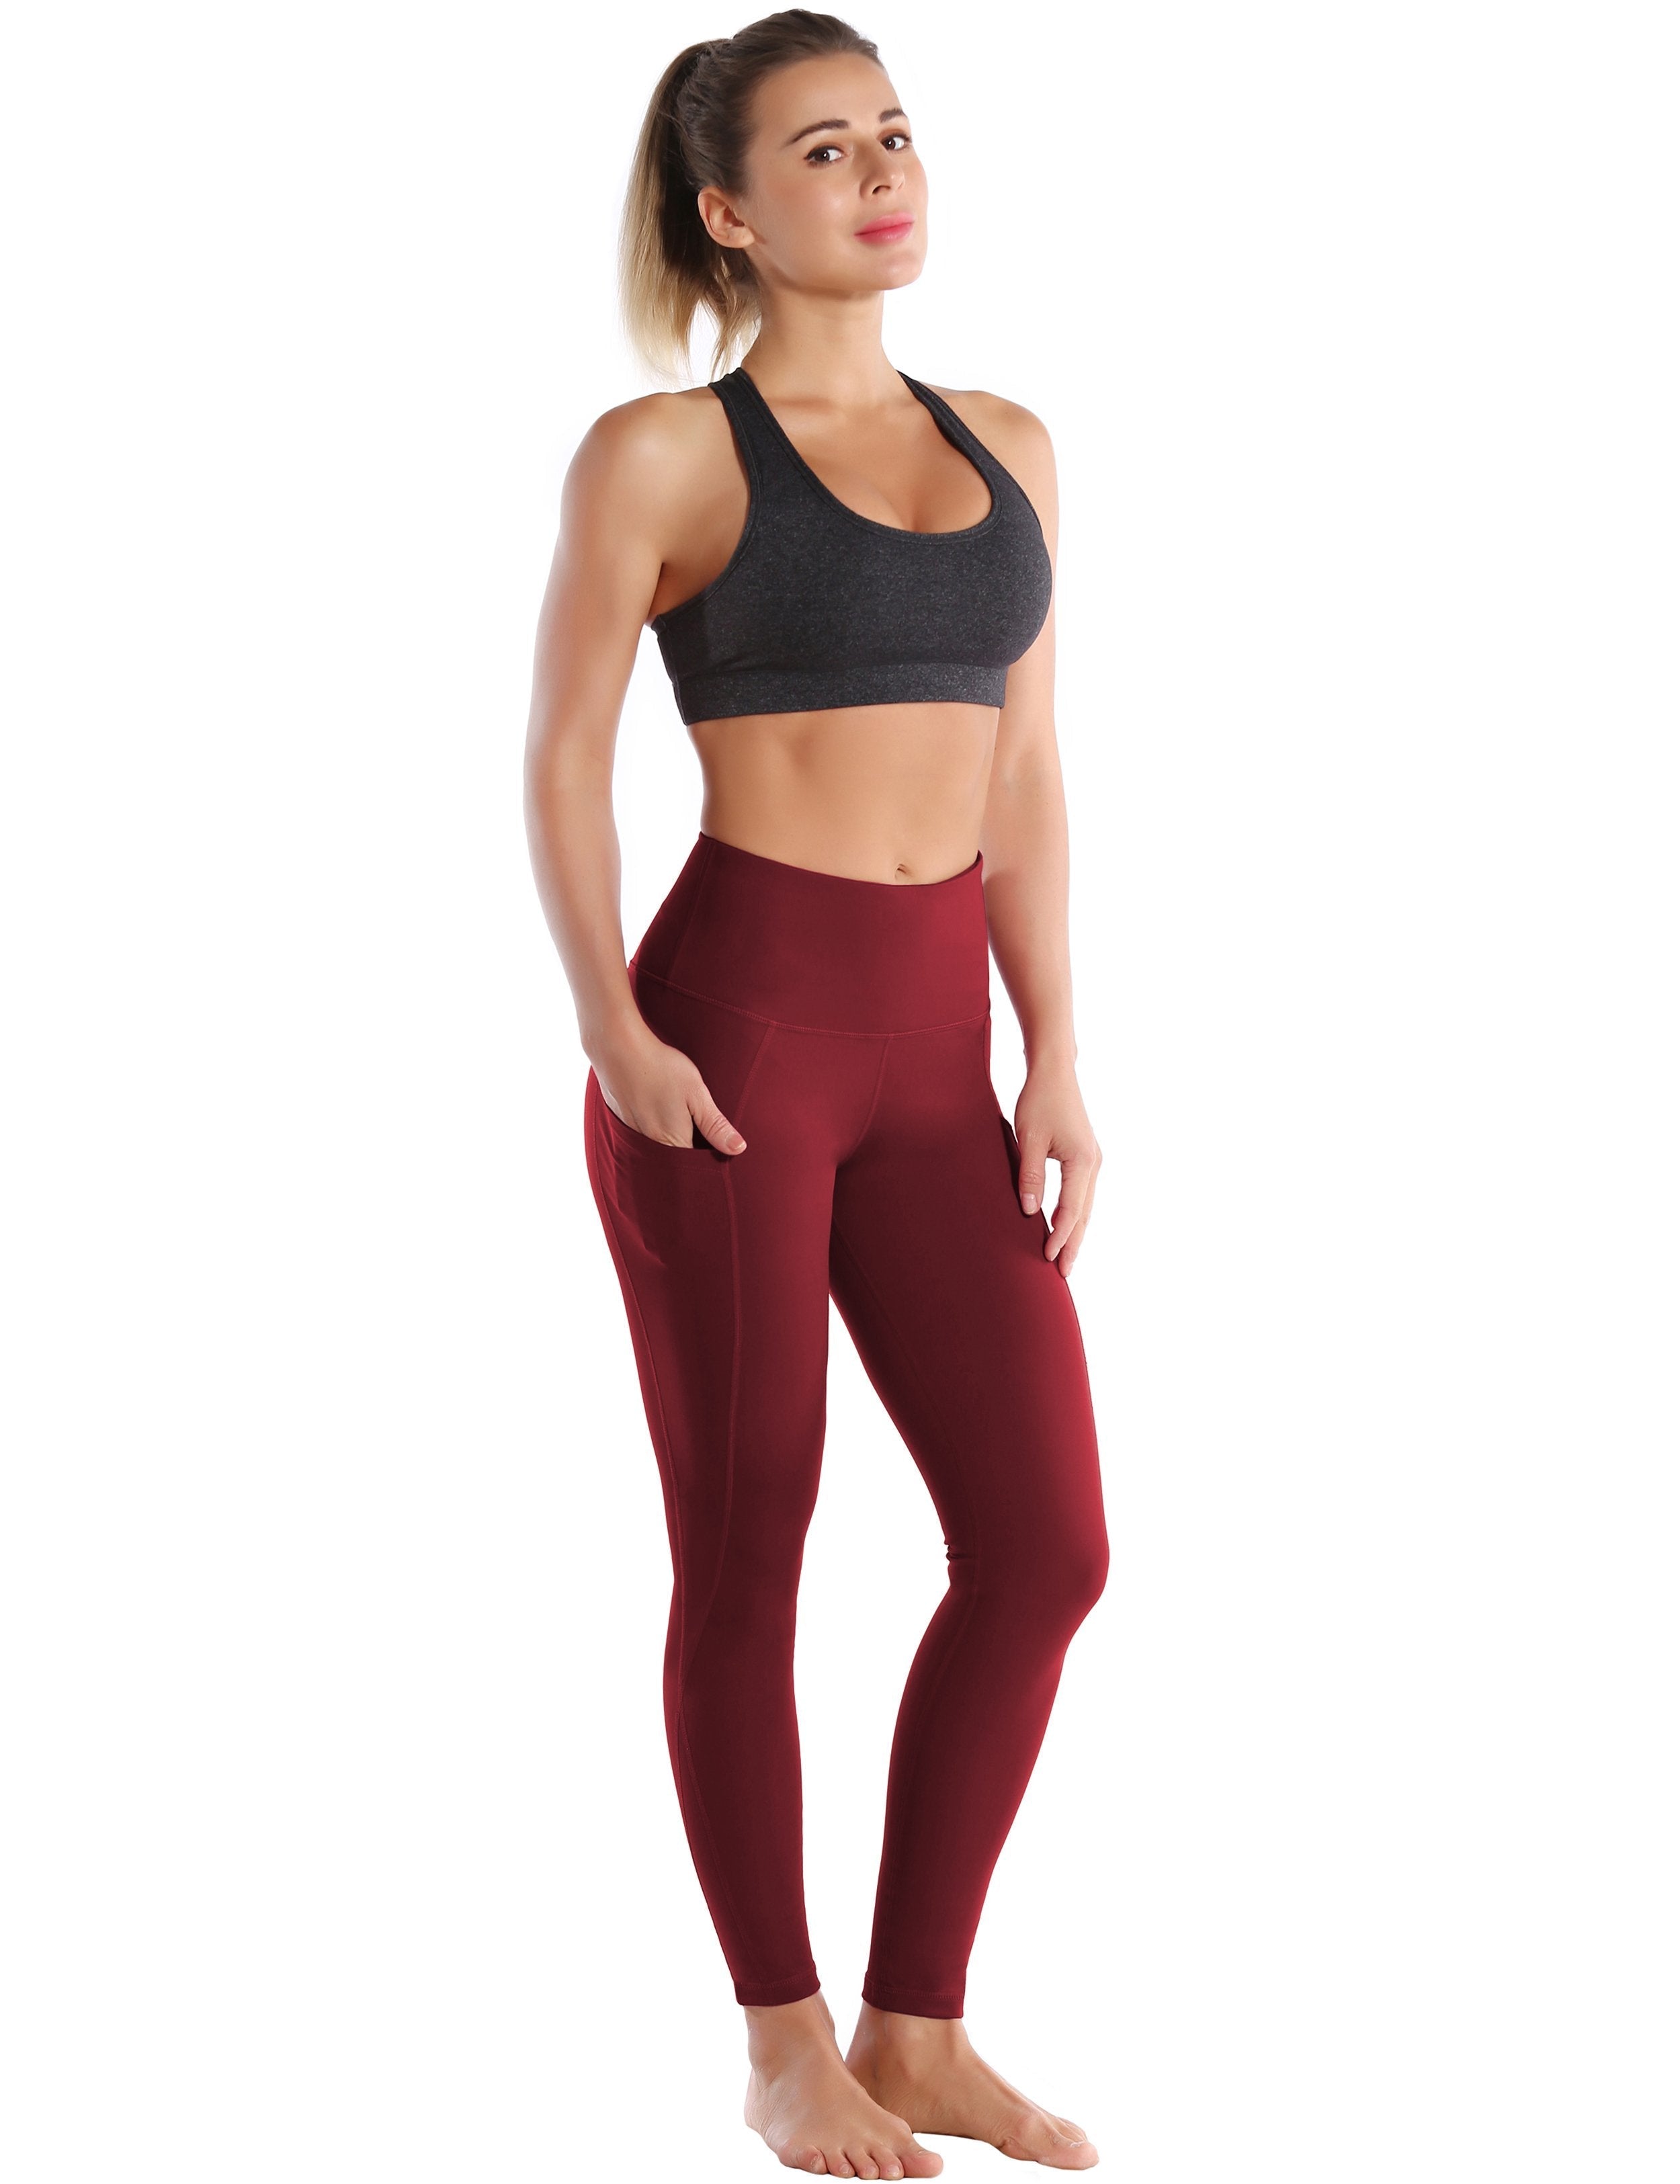 High Waist Side Pockets Tall Size Pants cherryred 75% Nylon, 25% Spandex Fabric doesn't attract lint easily 4-way stretch No see-through Moisture-wicking Tummy control Inner pocket